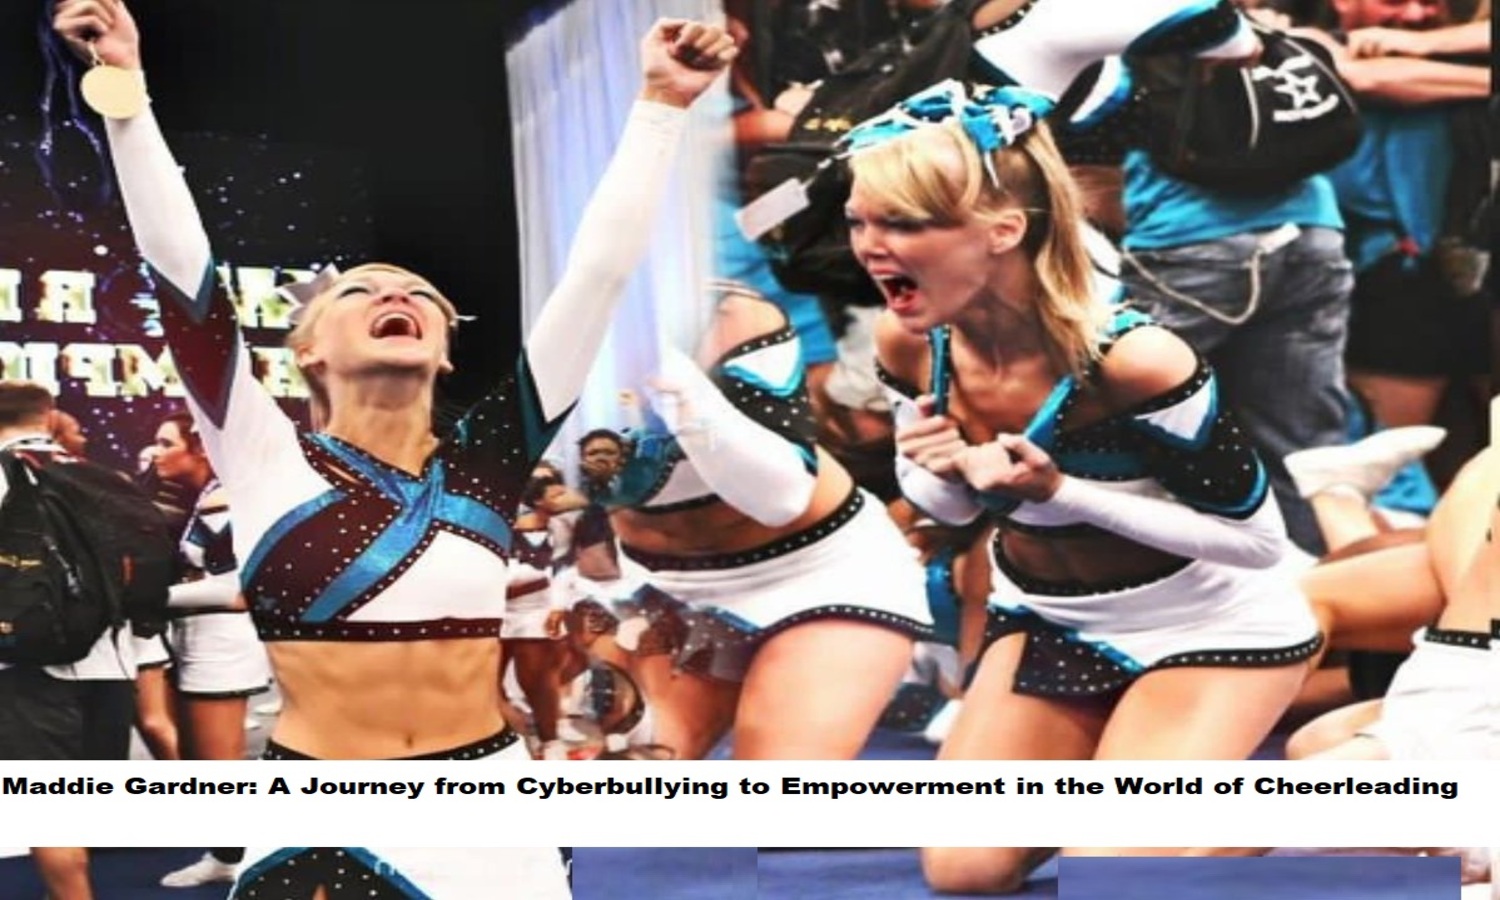 Maddie Gardner A Journey from Cyberbullying to Empowerment in the World of Cheerleading